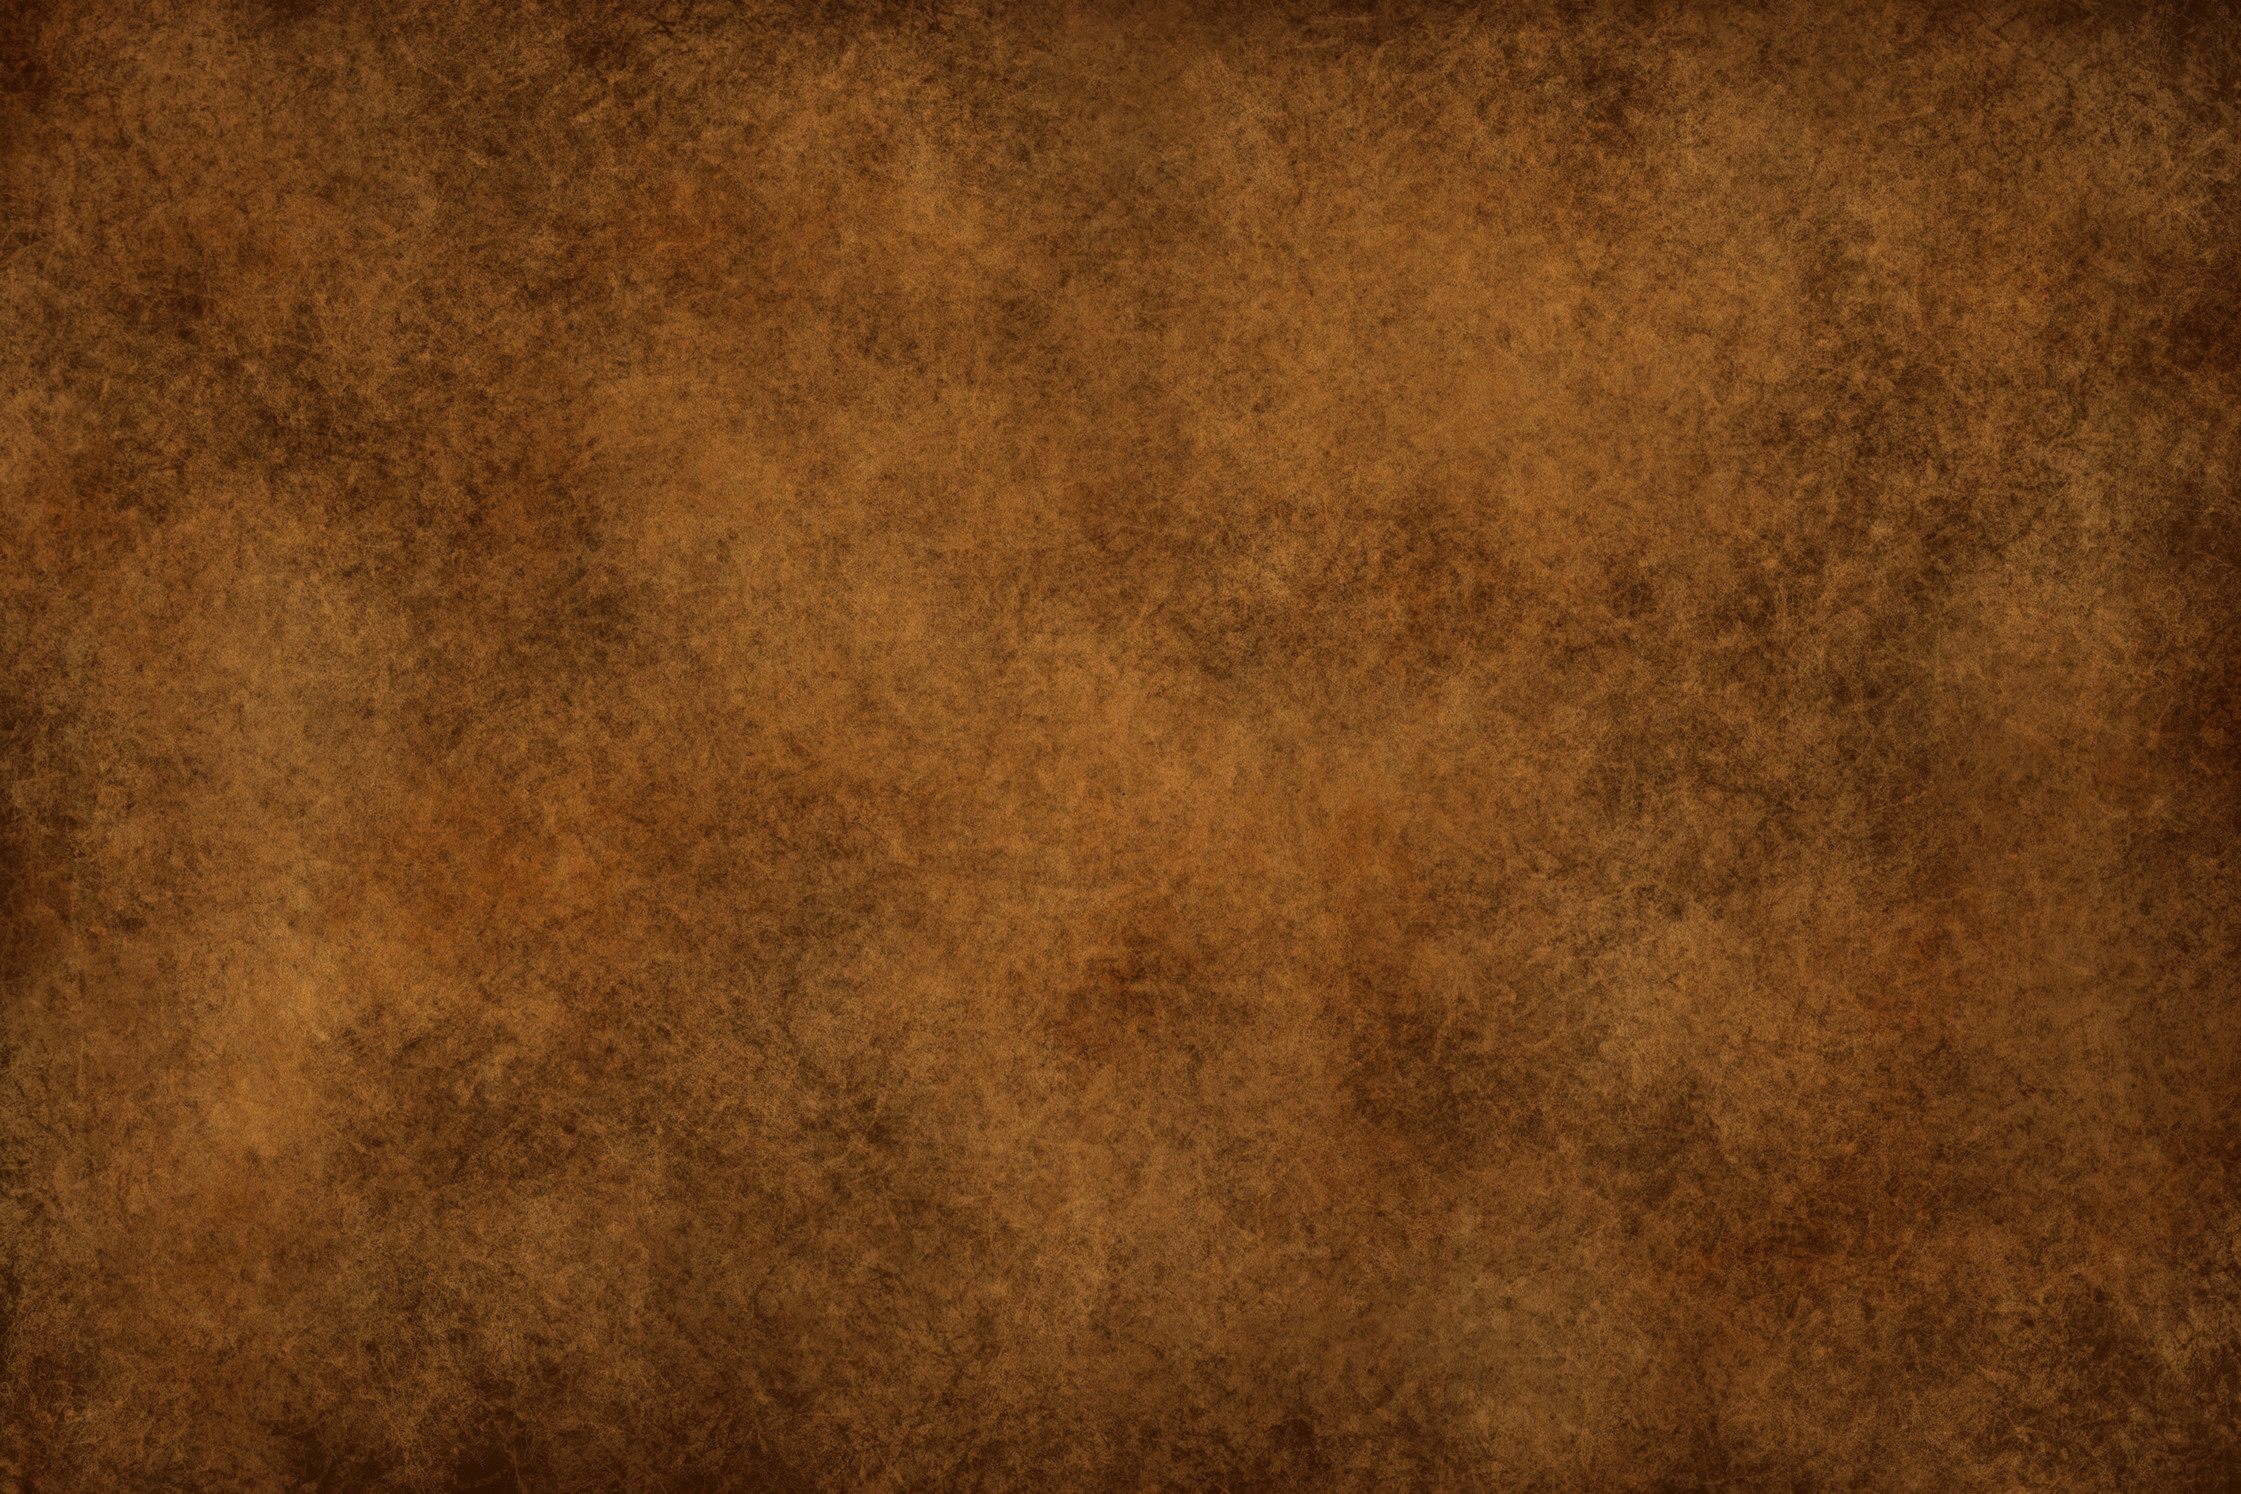 2241x1494 Download texture: brown ragged old paper, background, texture